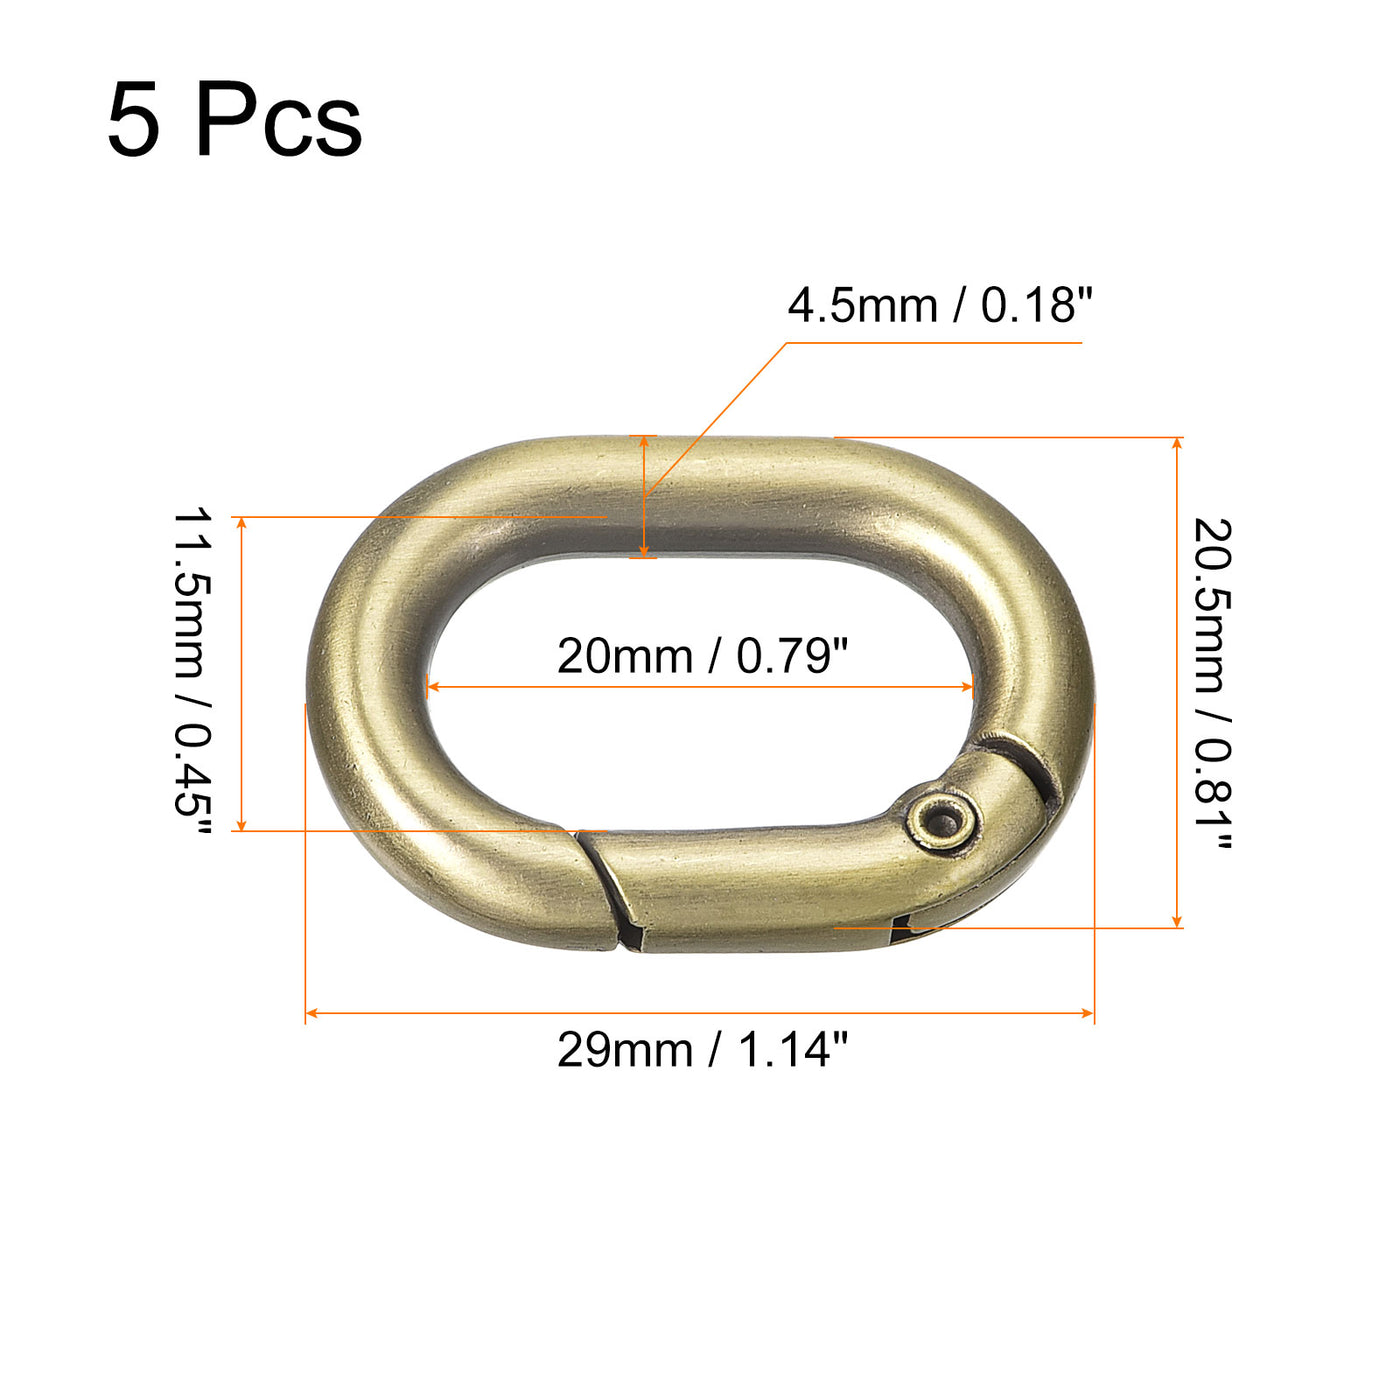 uxcell Uxcell 1.14" Spring Oval Ring Snap Clip Trigger for Bag Purse Keychain, 5Pcs Bronze